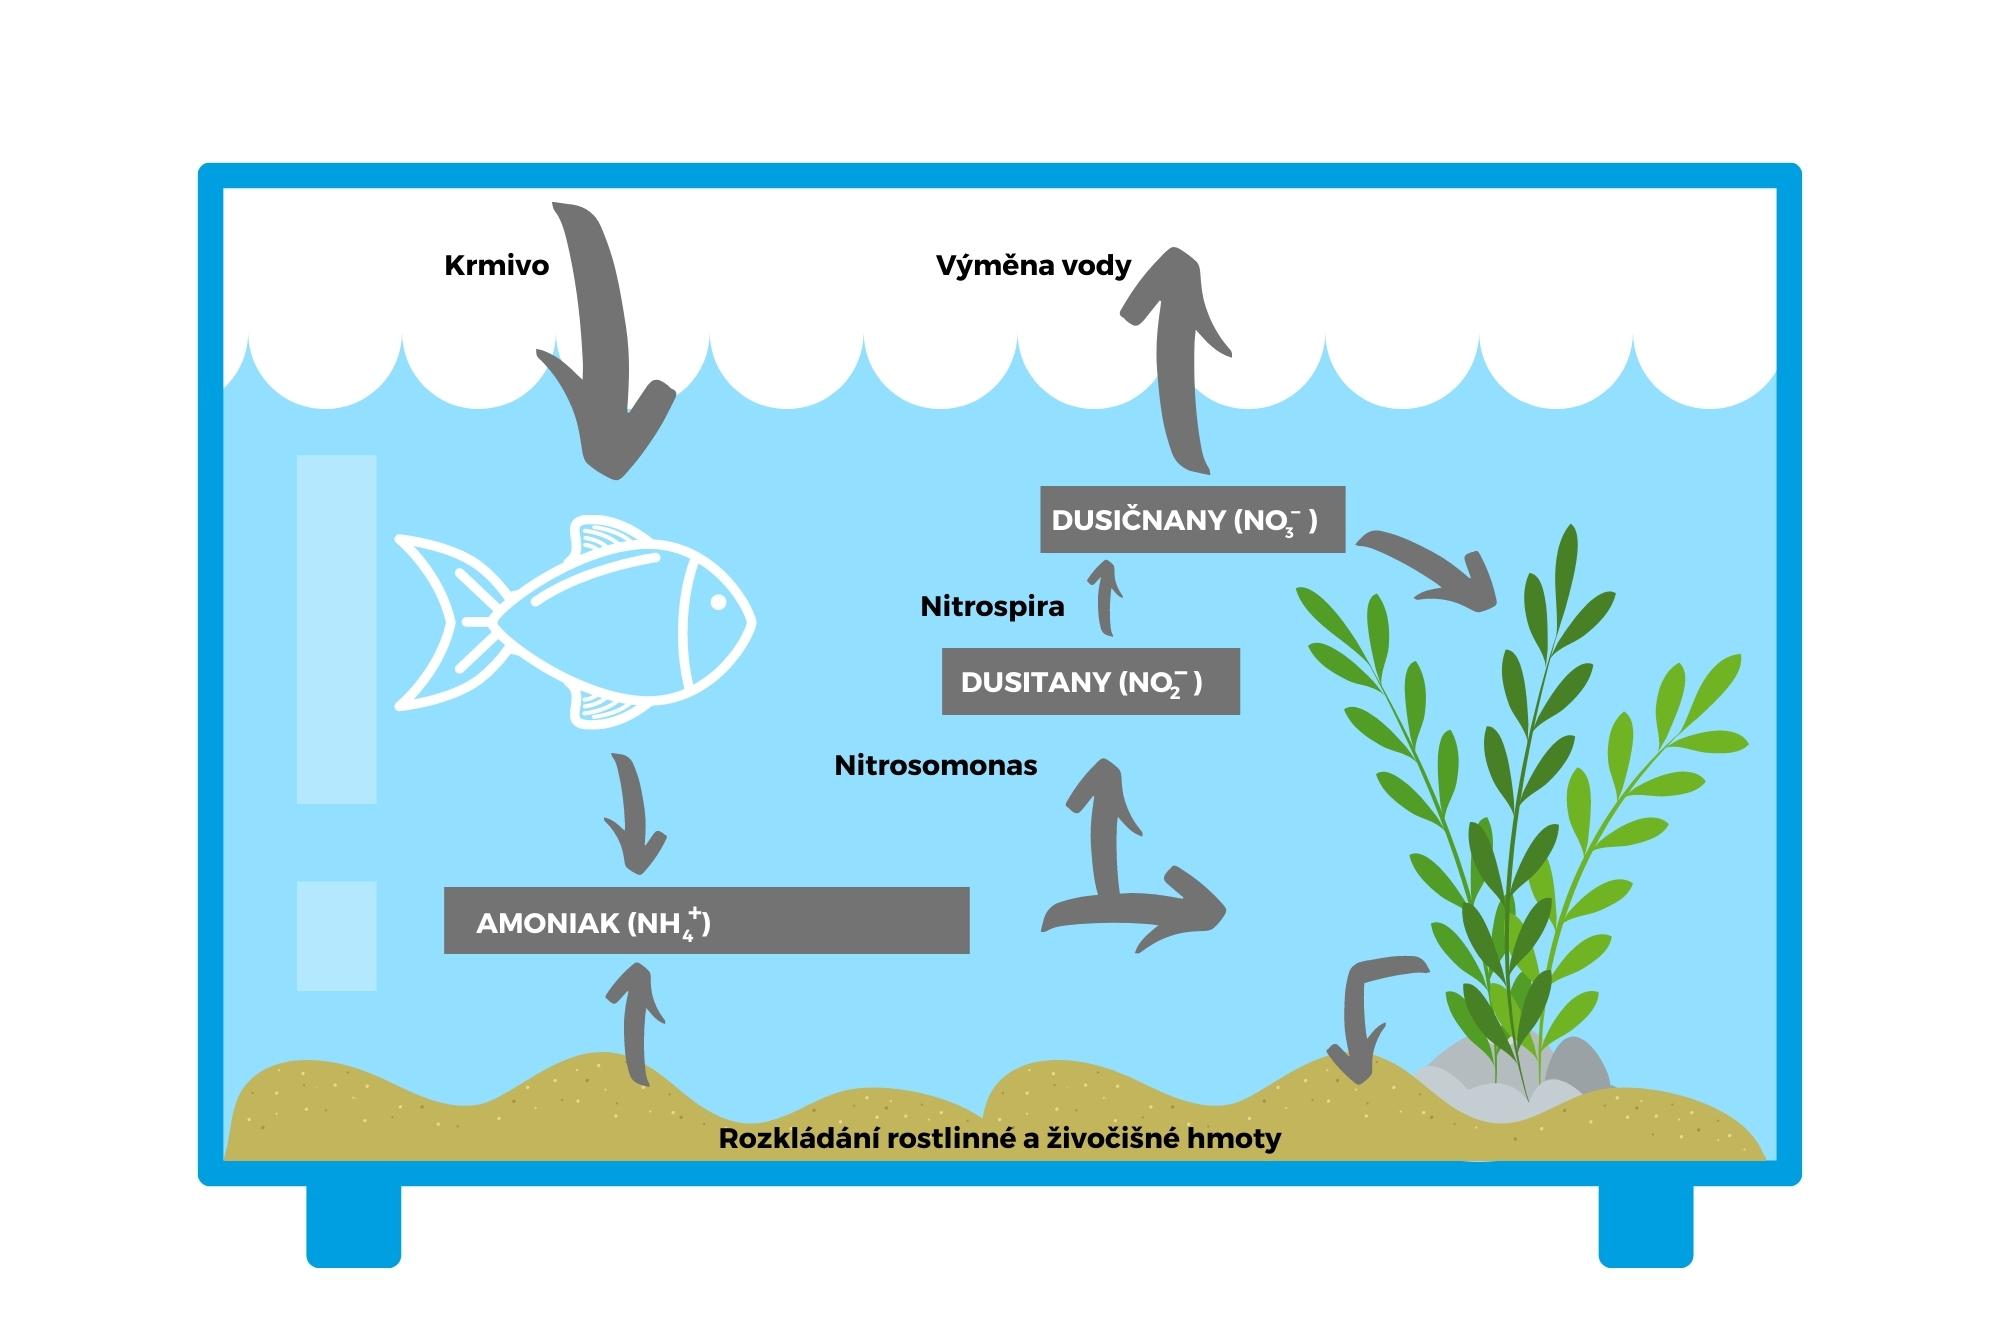 Nitrification and denitrification in aquaponic systems